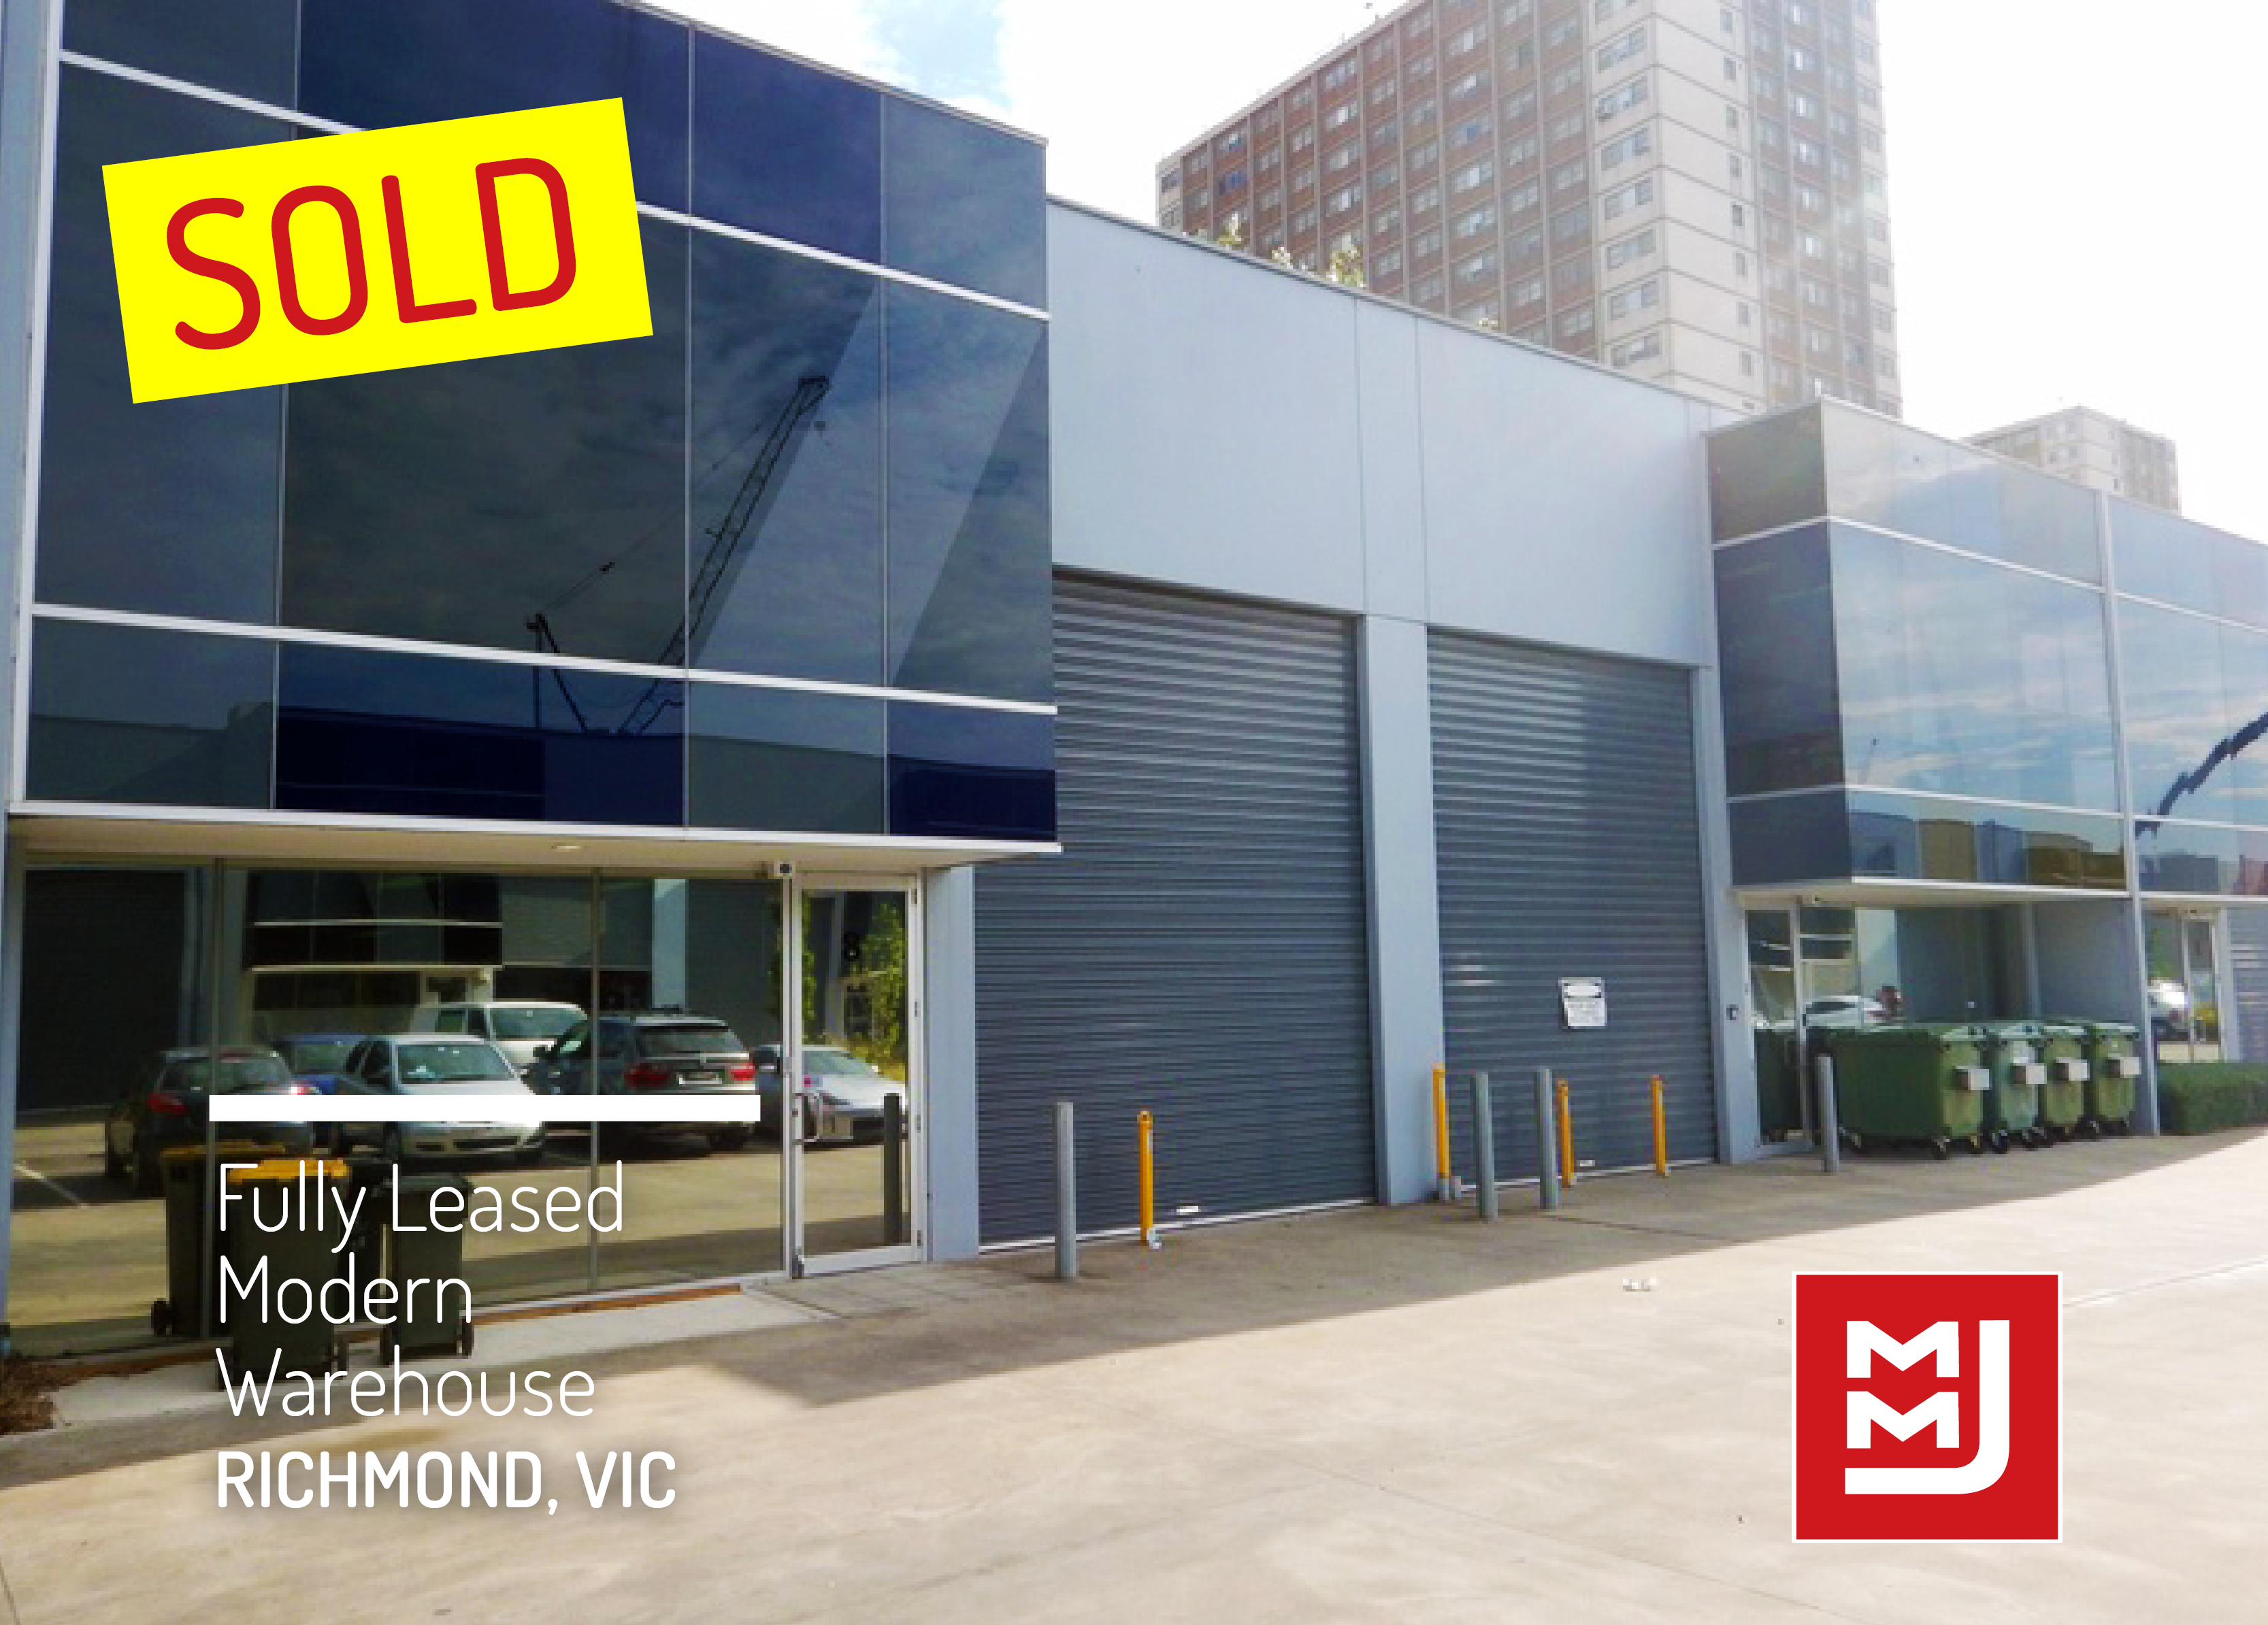 #SOLD - Savvy investor snaps up Richmond warehouse in just 7 days. 